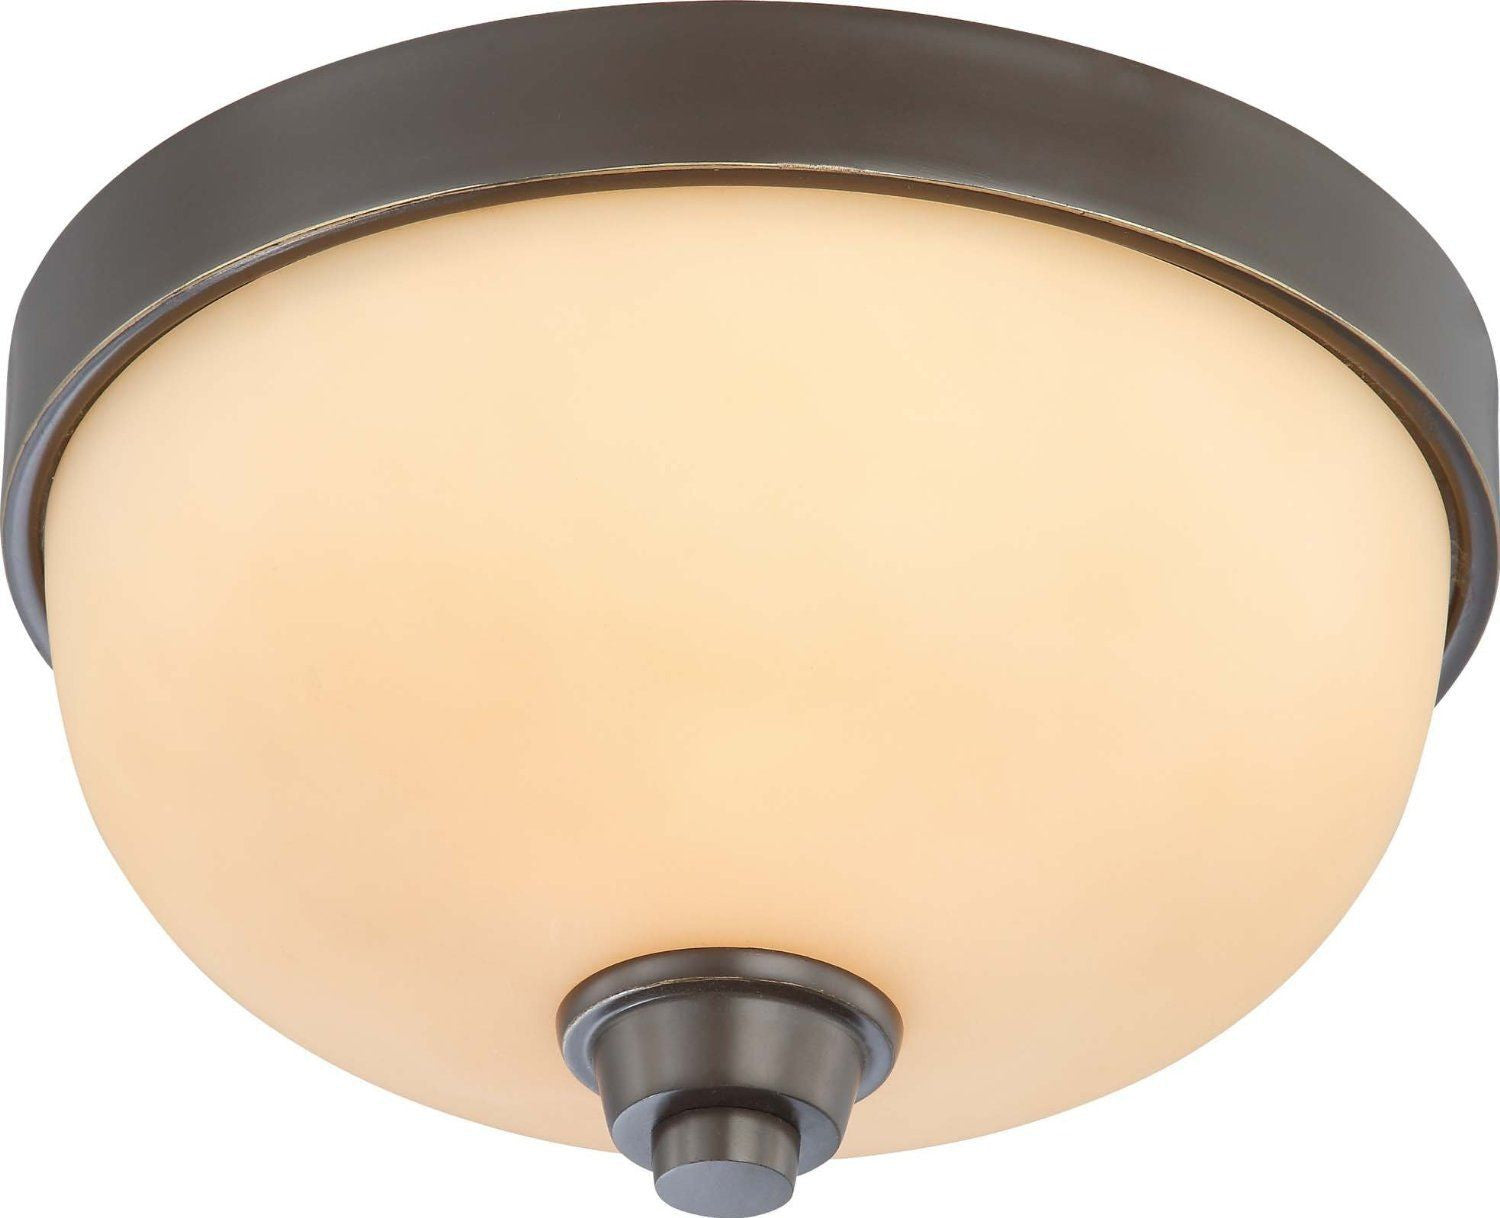 Nuvo Lighting 60-4211 Helium Collection One Light Flush Ceiling Mount in Vintage Bronze Finish